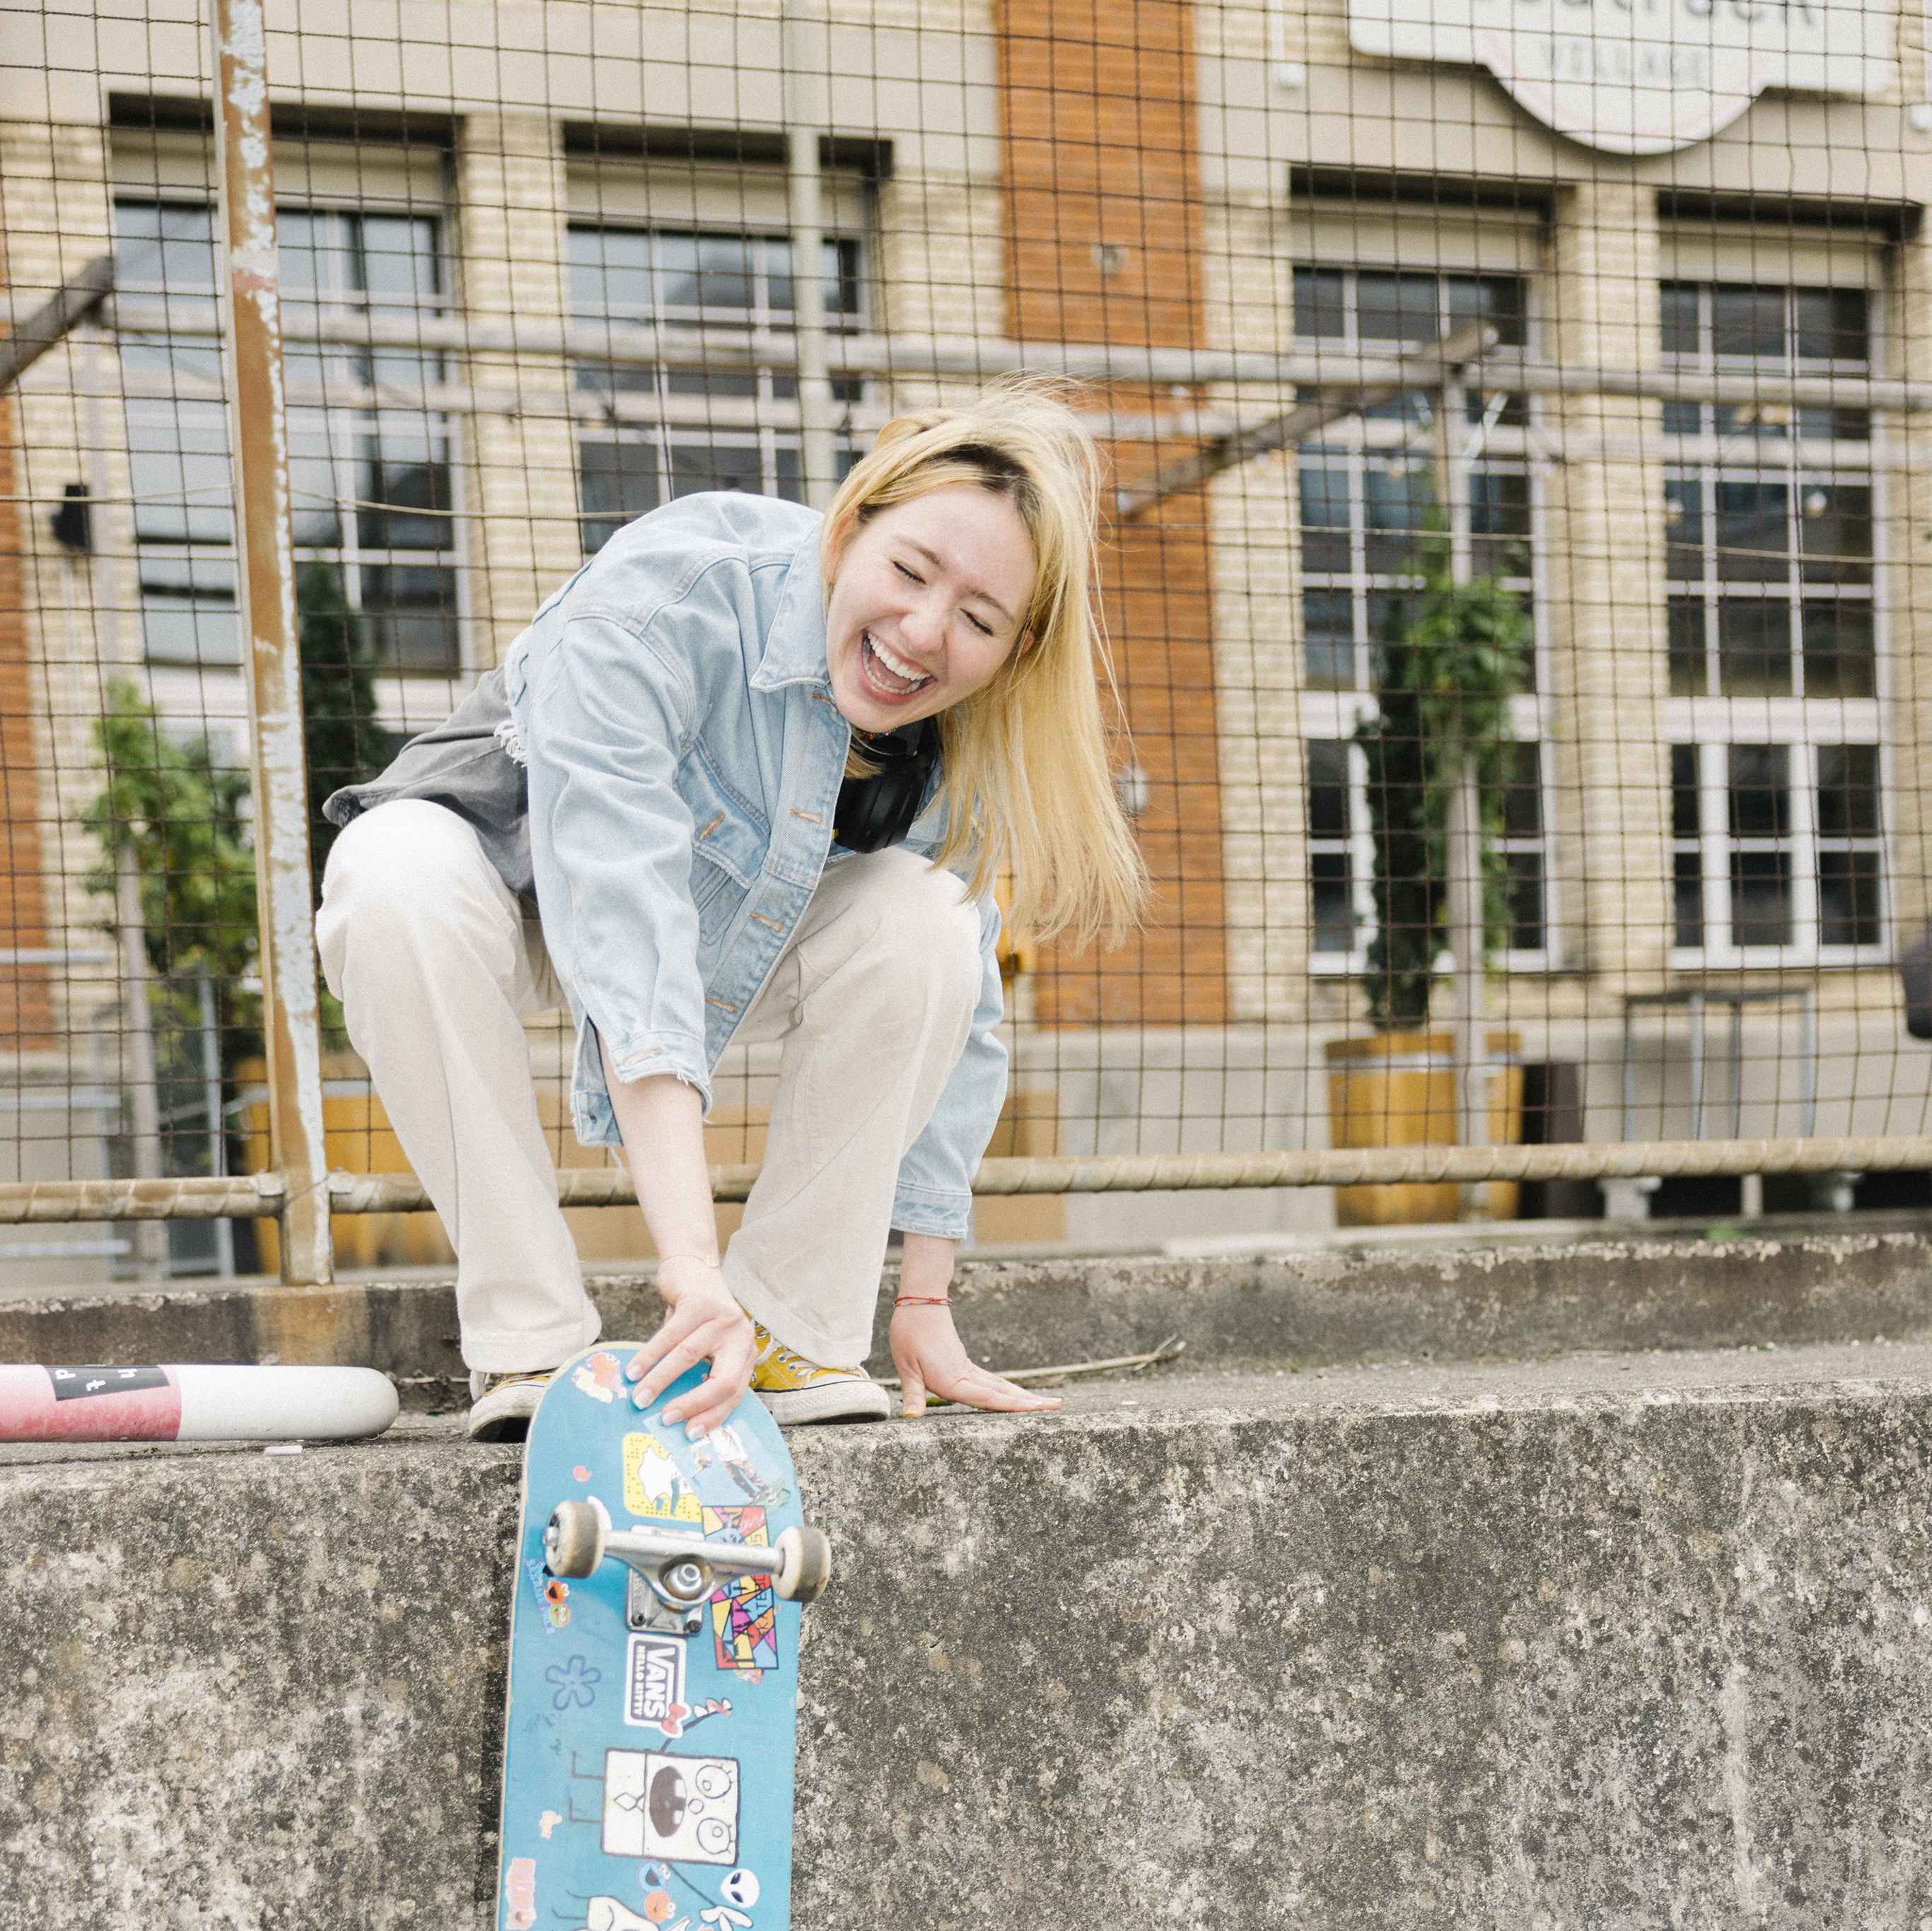 A teenager crouches on a wall laughing while holding her skateboard.